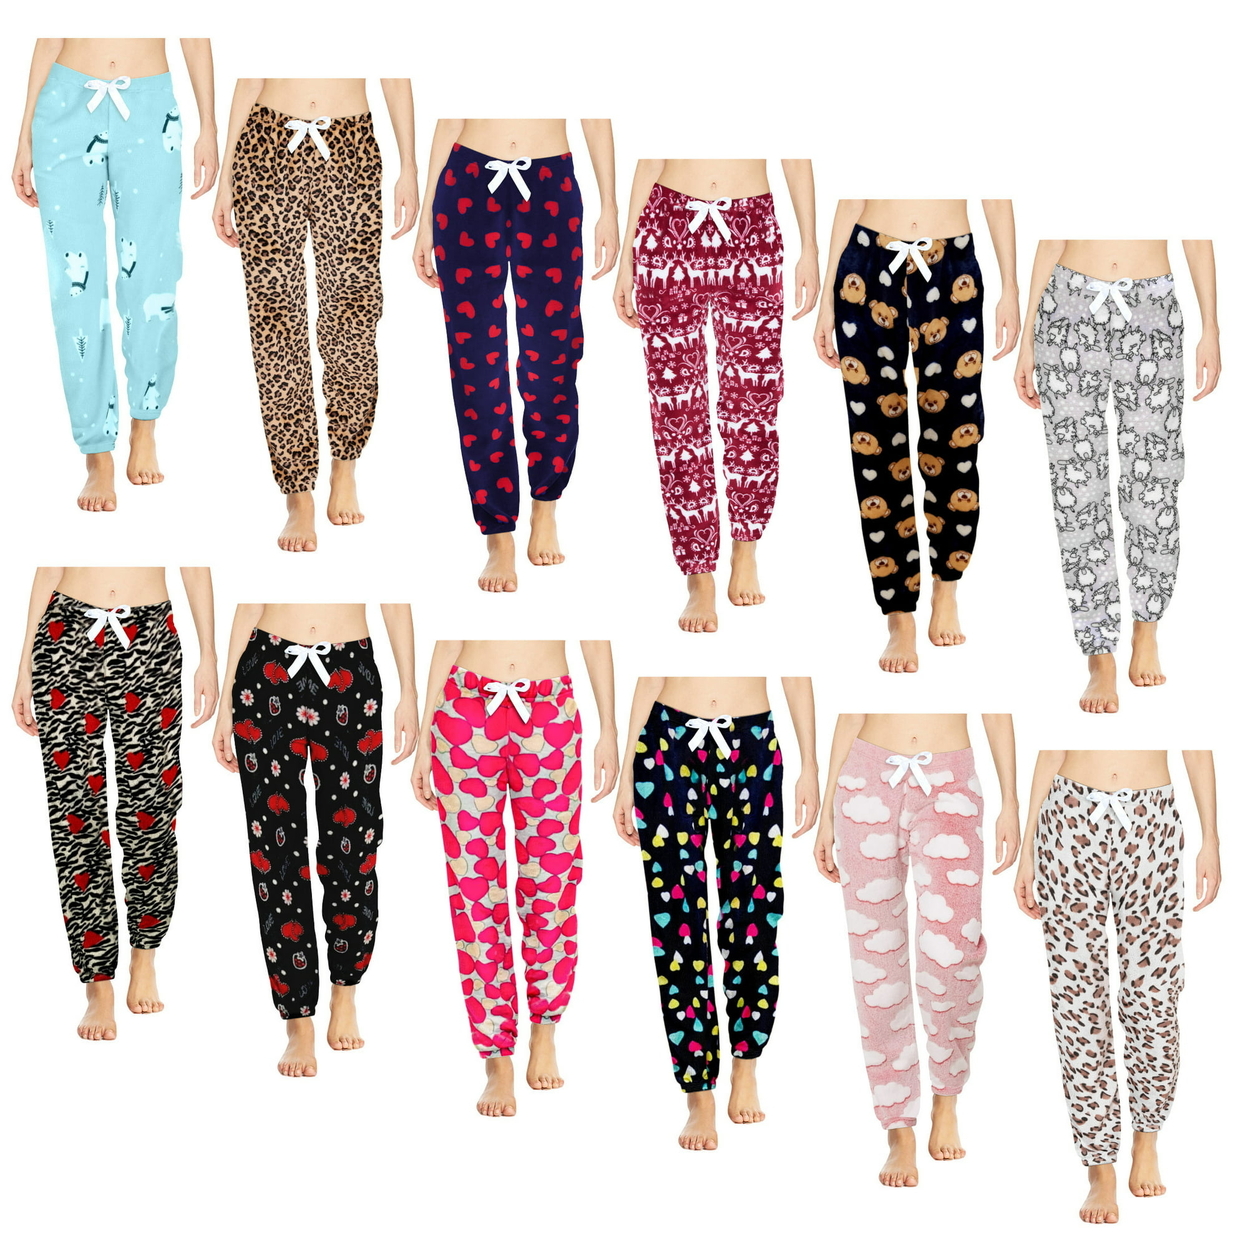 Multi-Pack: Women's Printed Ultra-Soft Comfy Stretch Micro-Fleece Pajama Lounge Pants - 3-pack, Shapes, X-large